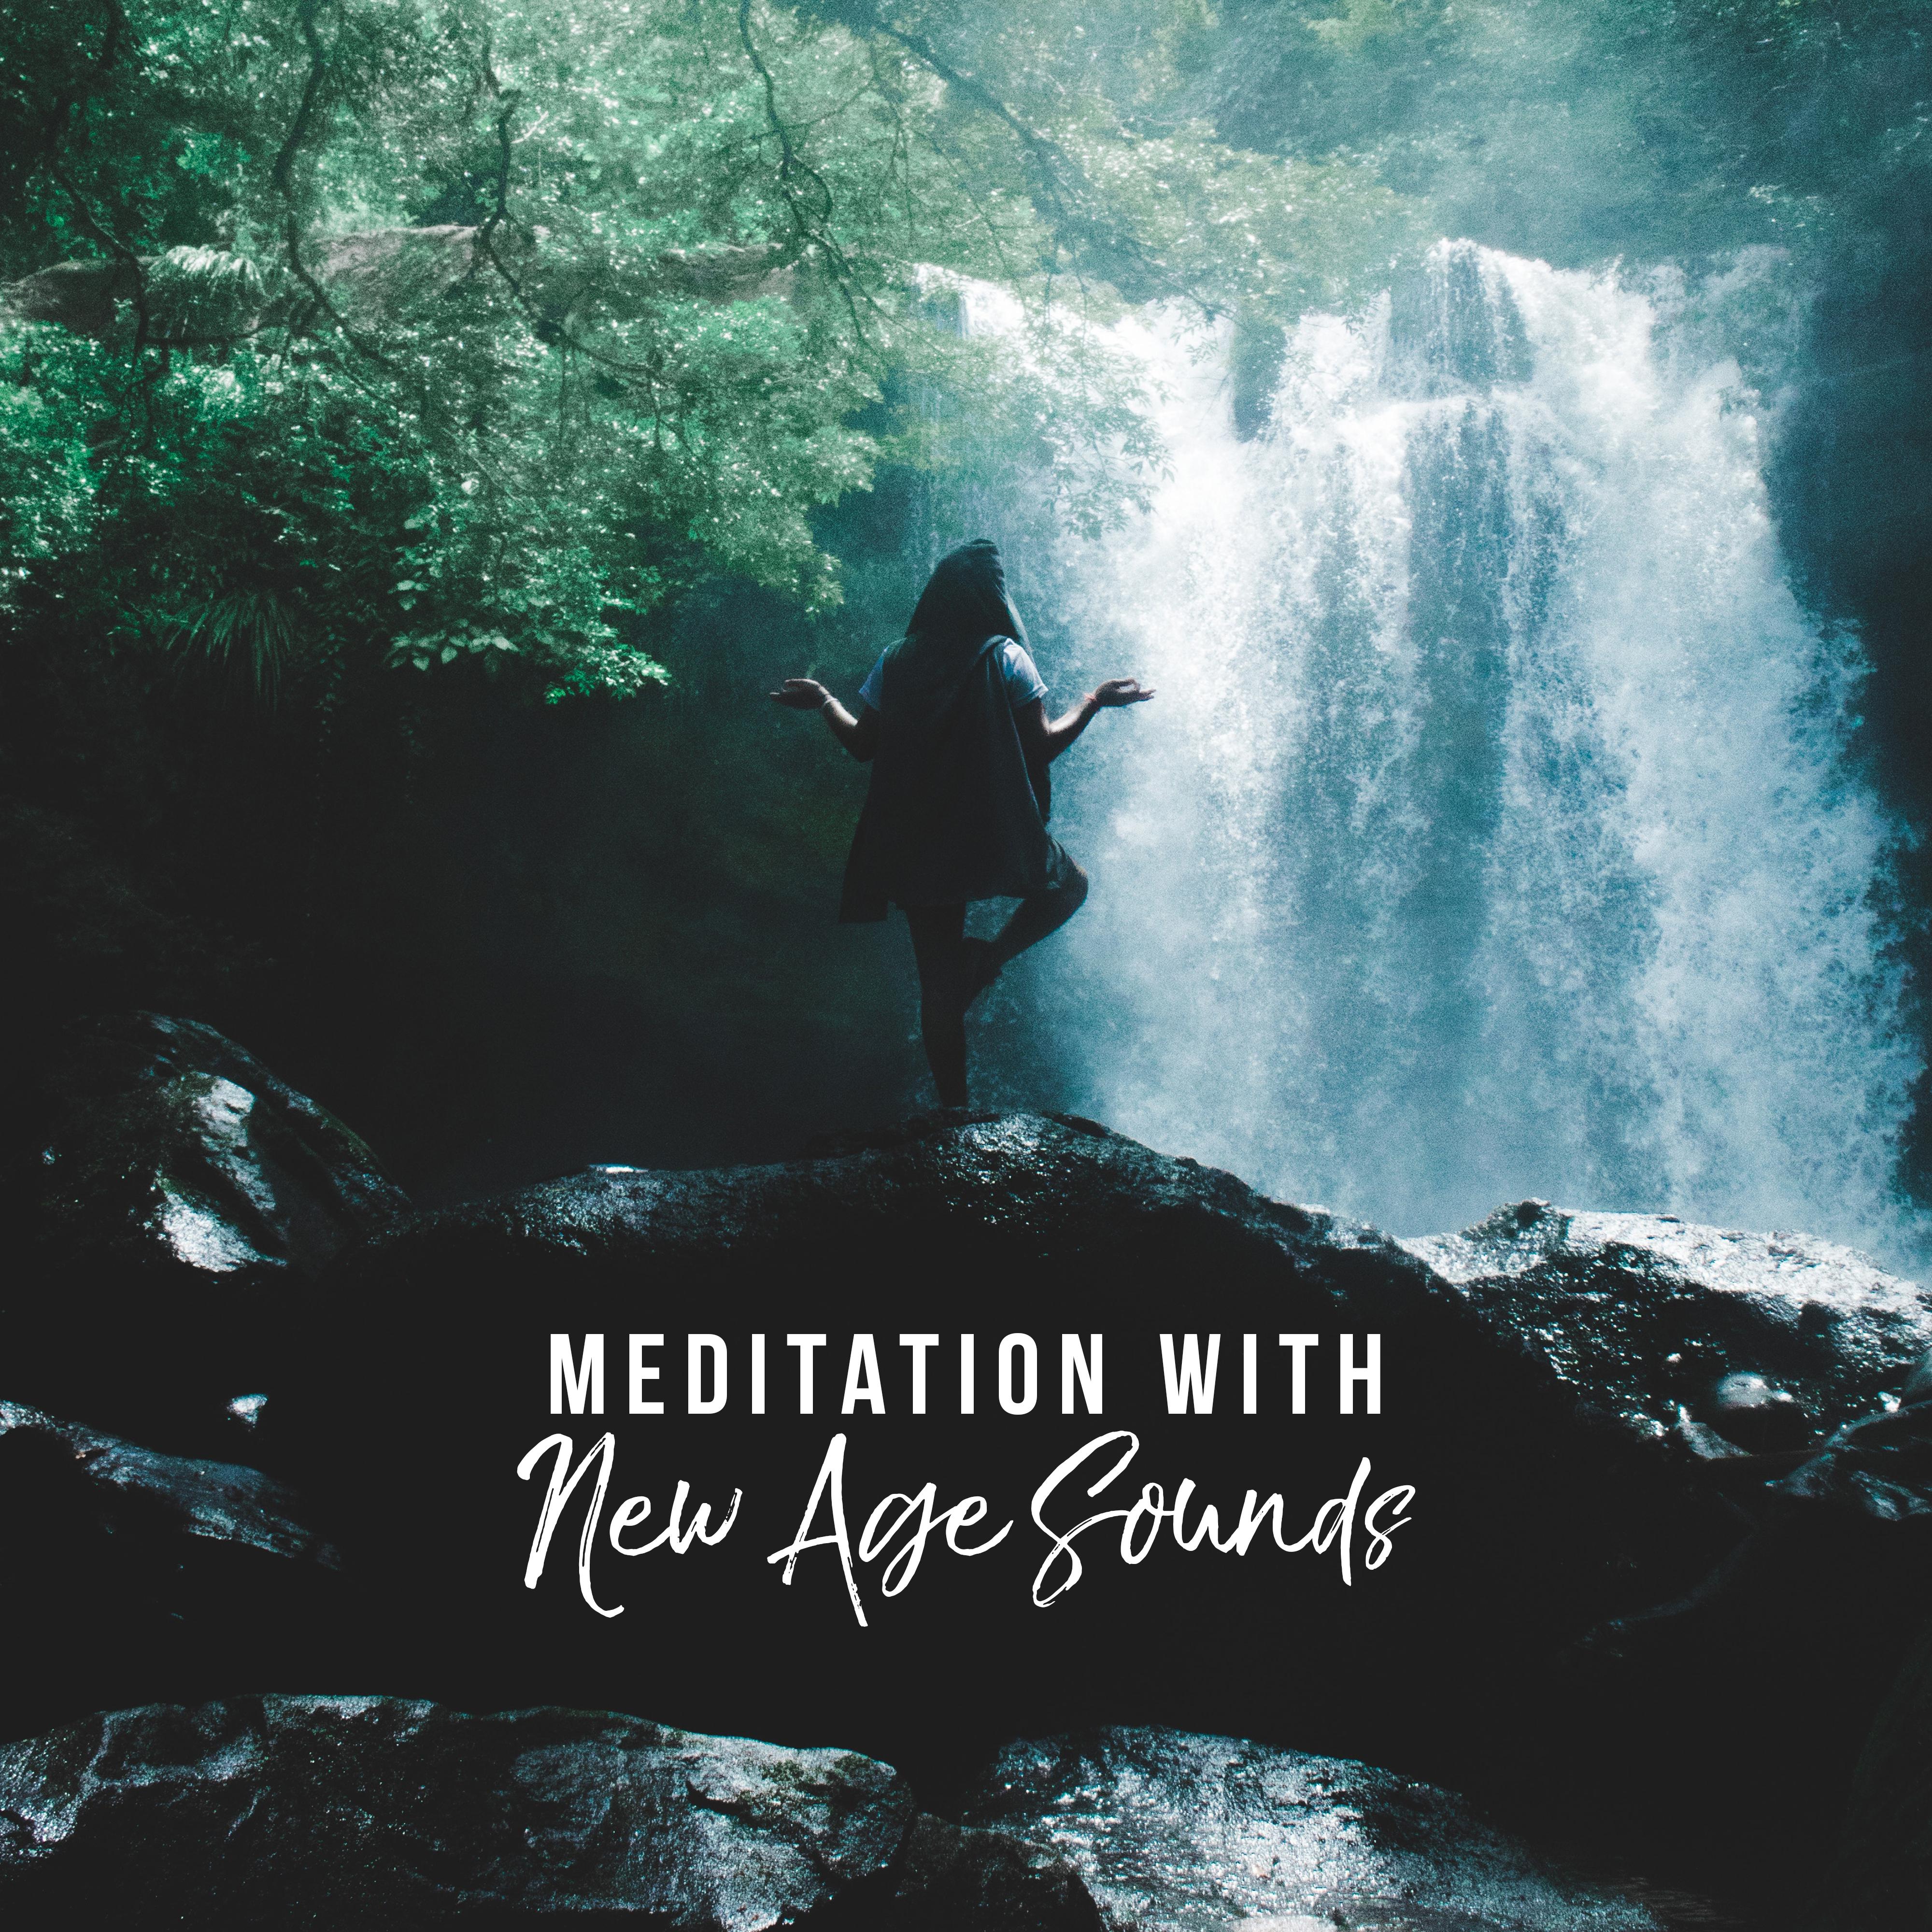 Meditation with New Age Sounds